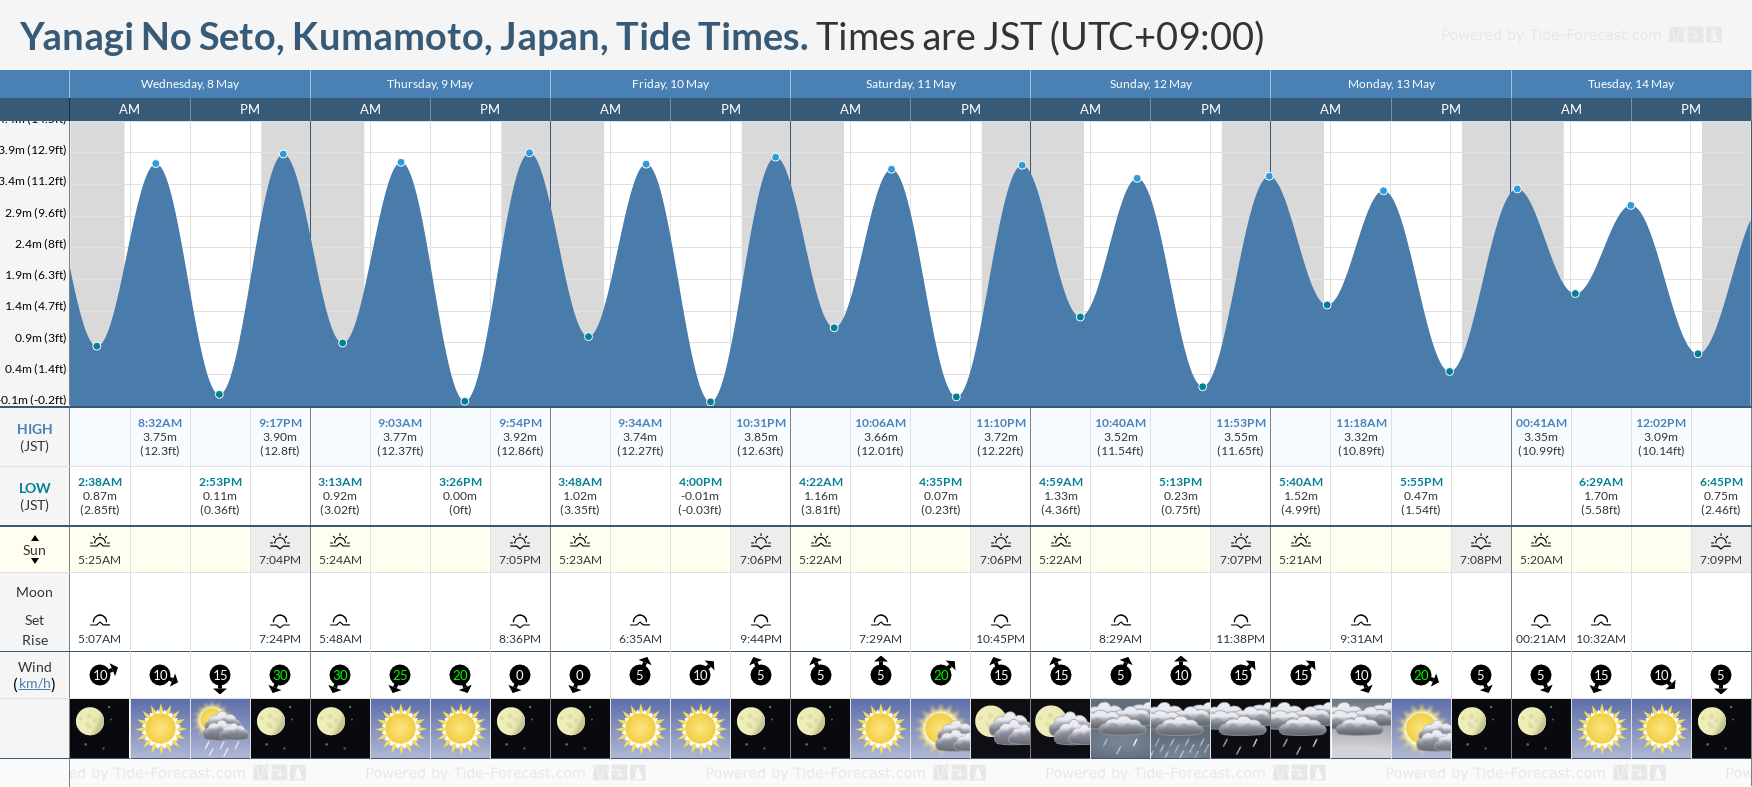 Yanagi No Seto, Kumamoto, Japan Tide Chart including high and low tide tide times for the next 7 days